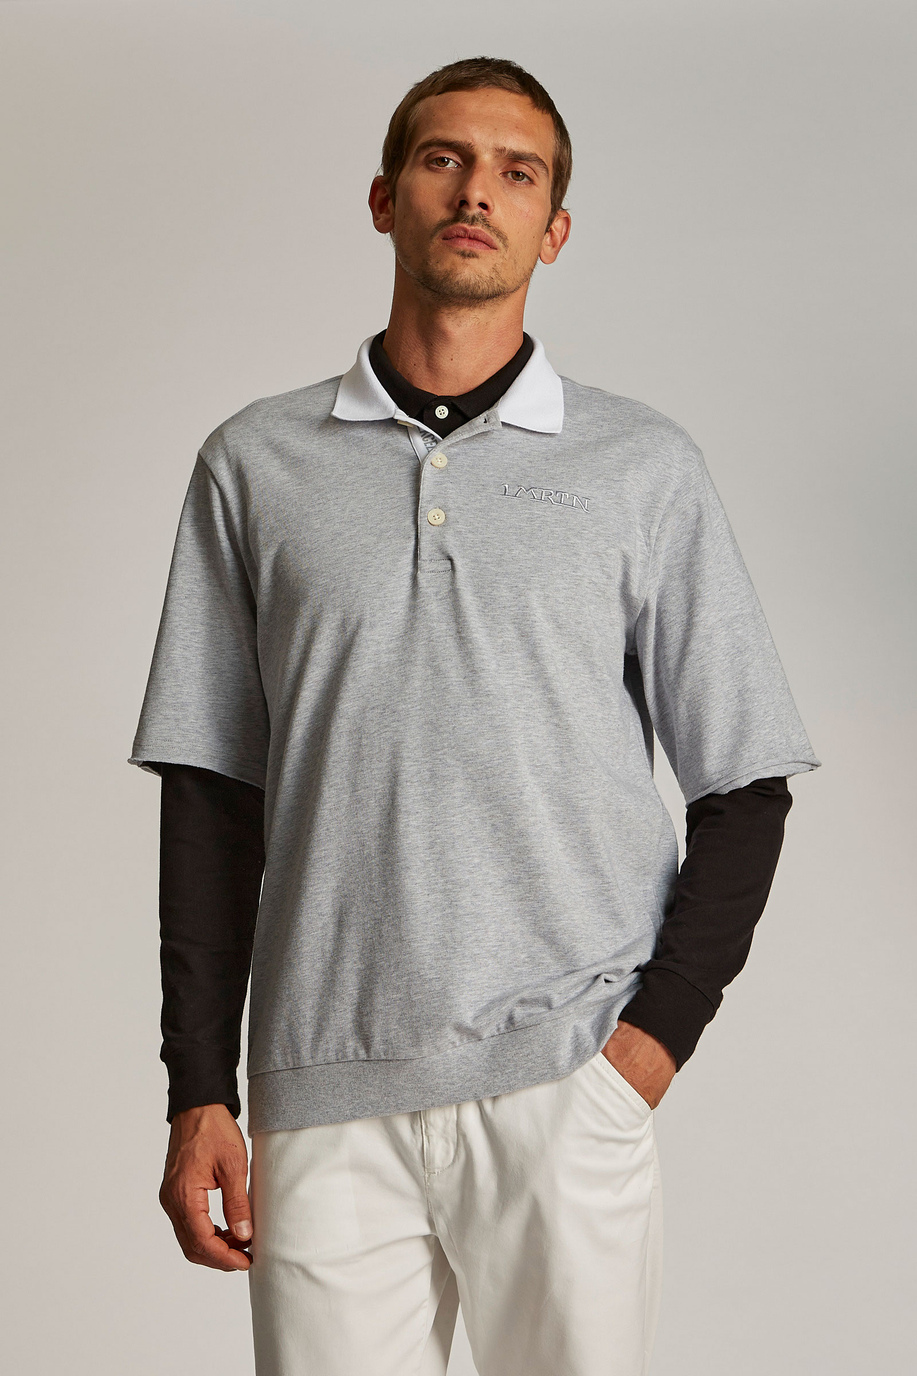 Men's oversized short-sleeved polo shirt featuring a contrasting collar | La Martina - Official Online Shop